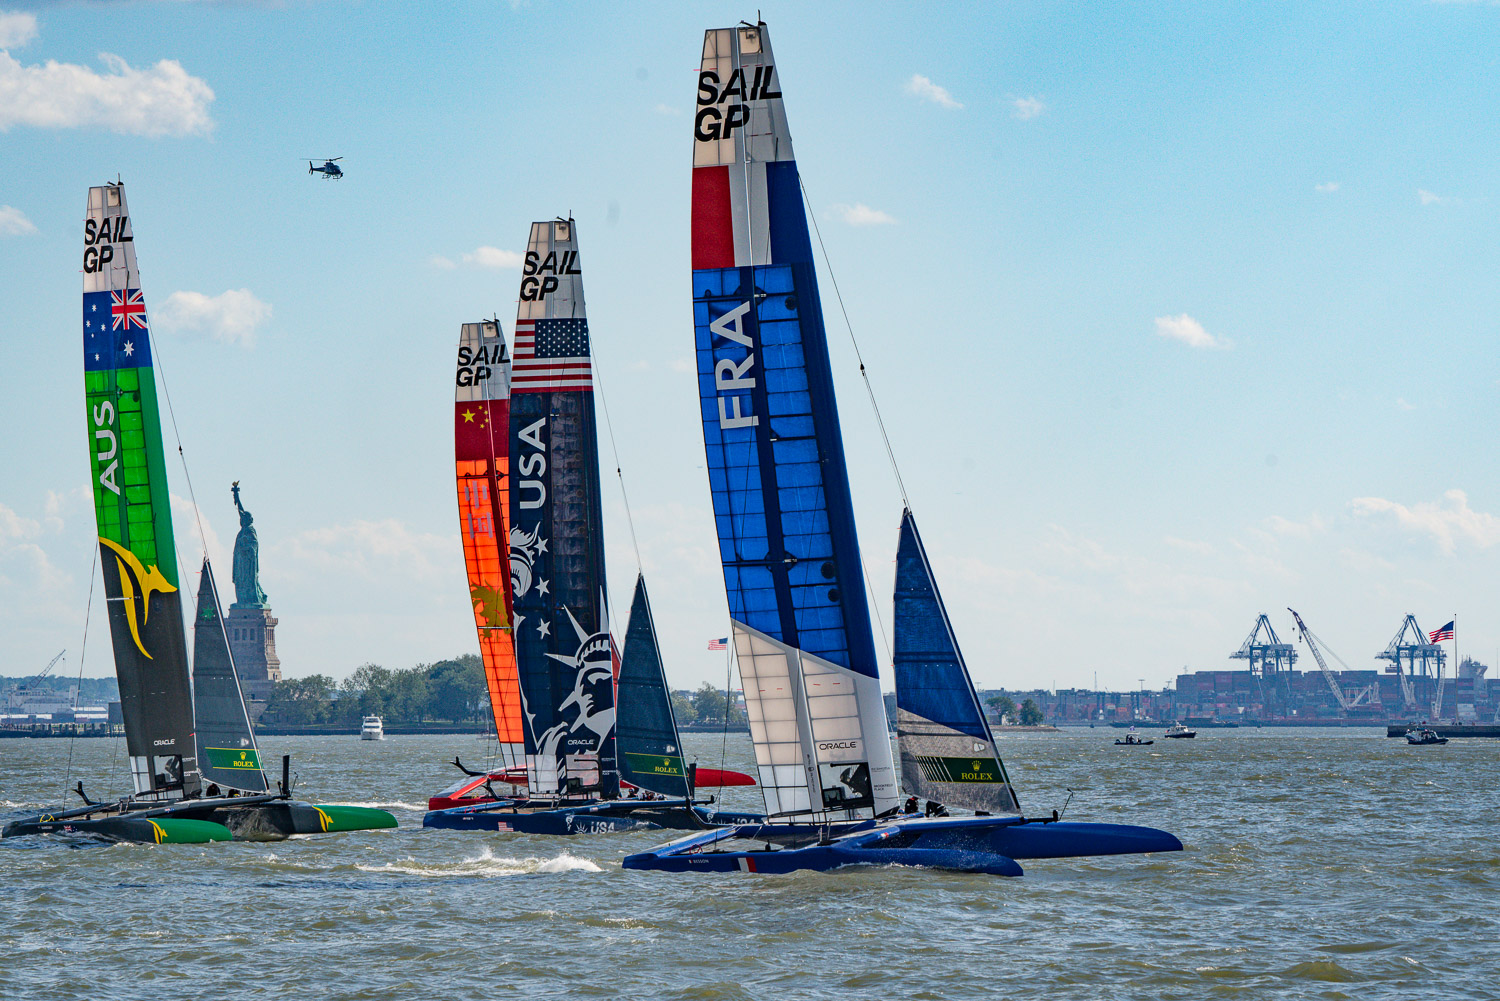 The sail GP boughts are in a tight race at this point. The statue of liberty sits in the background on the Hudson River.jpg